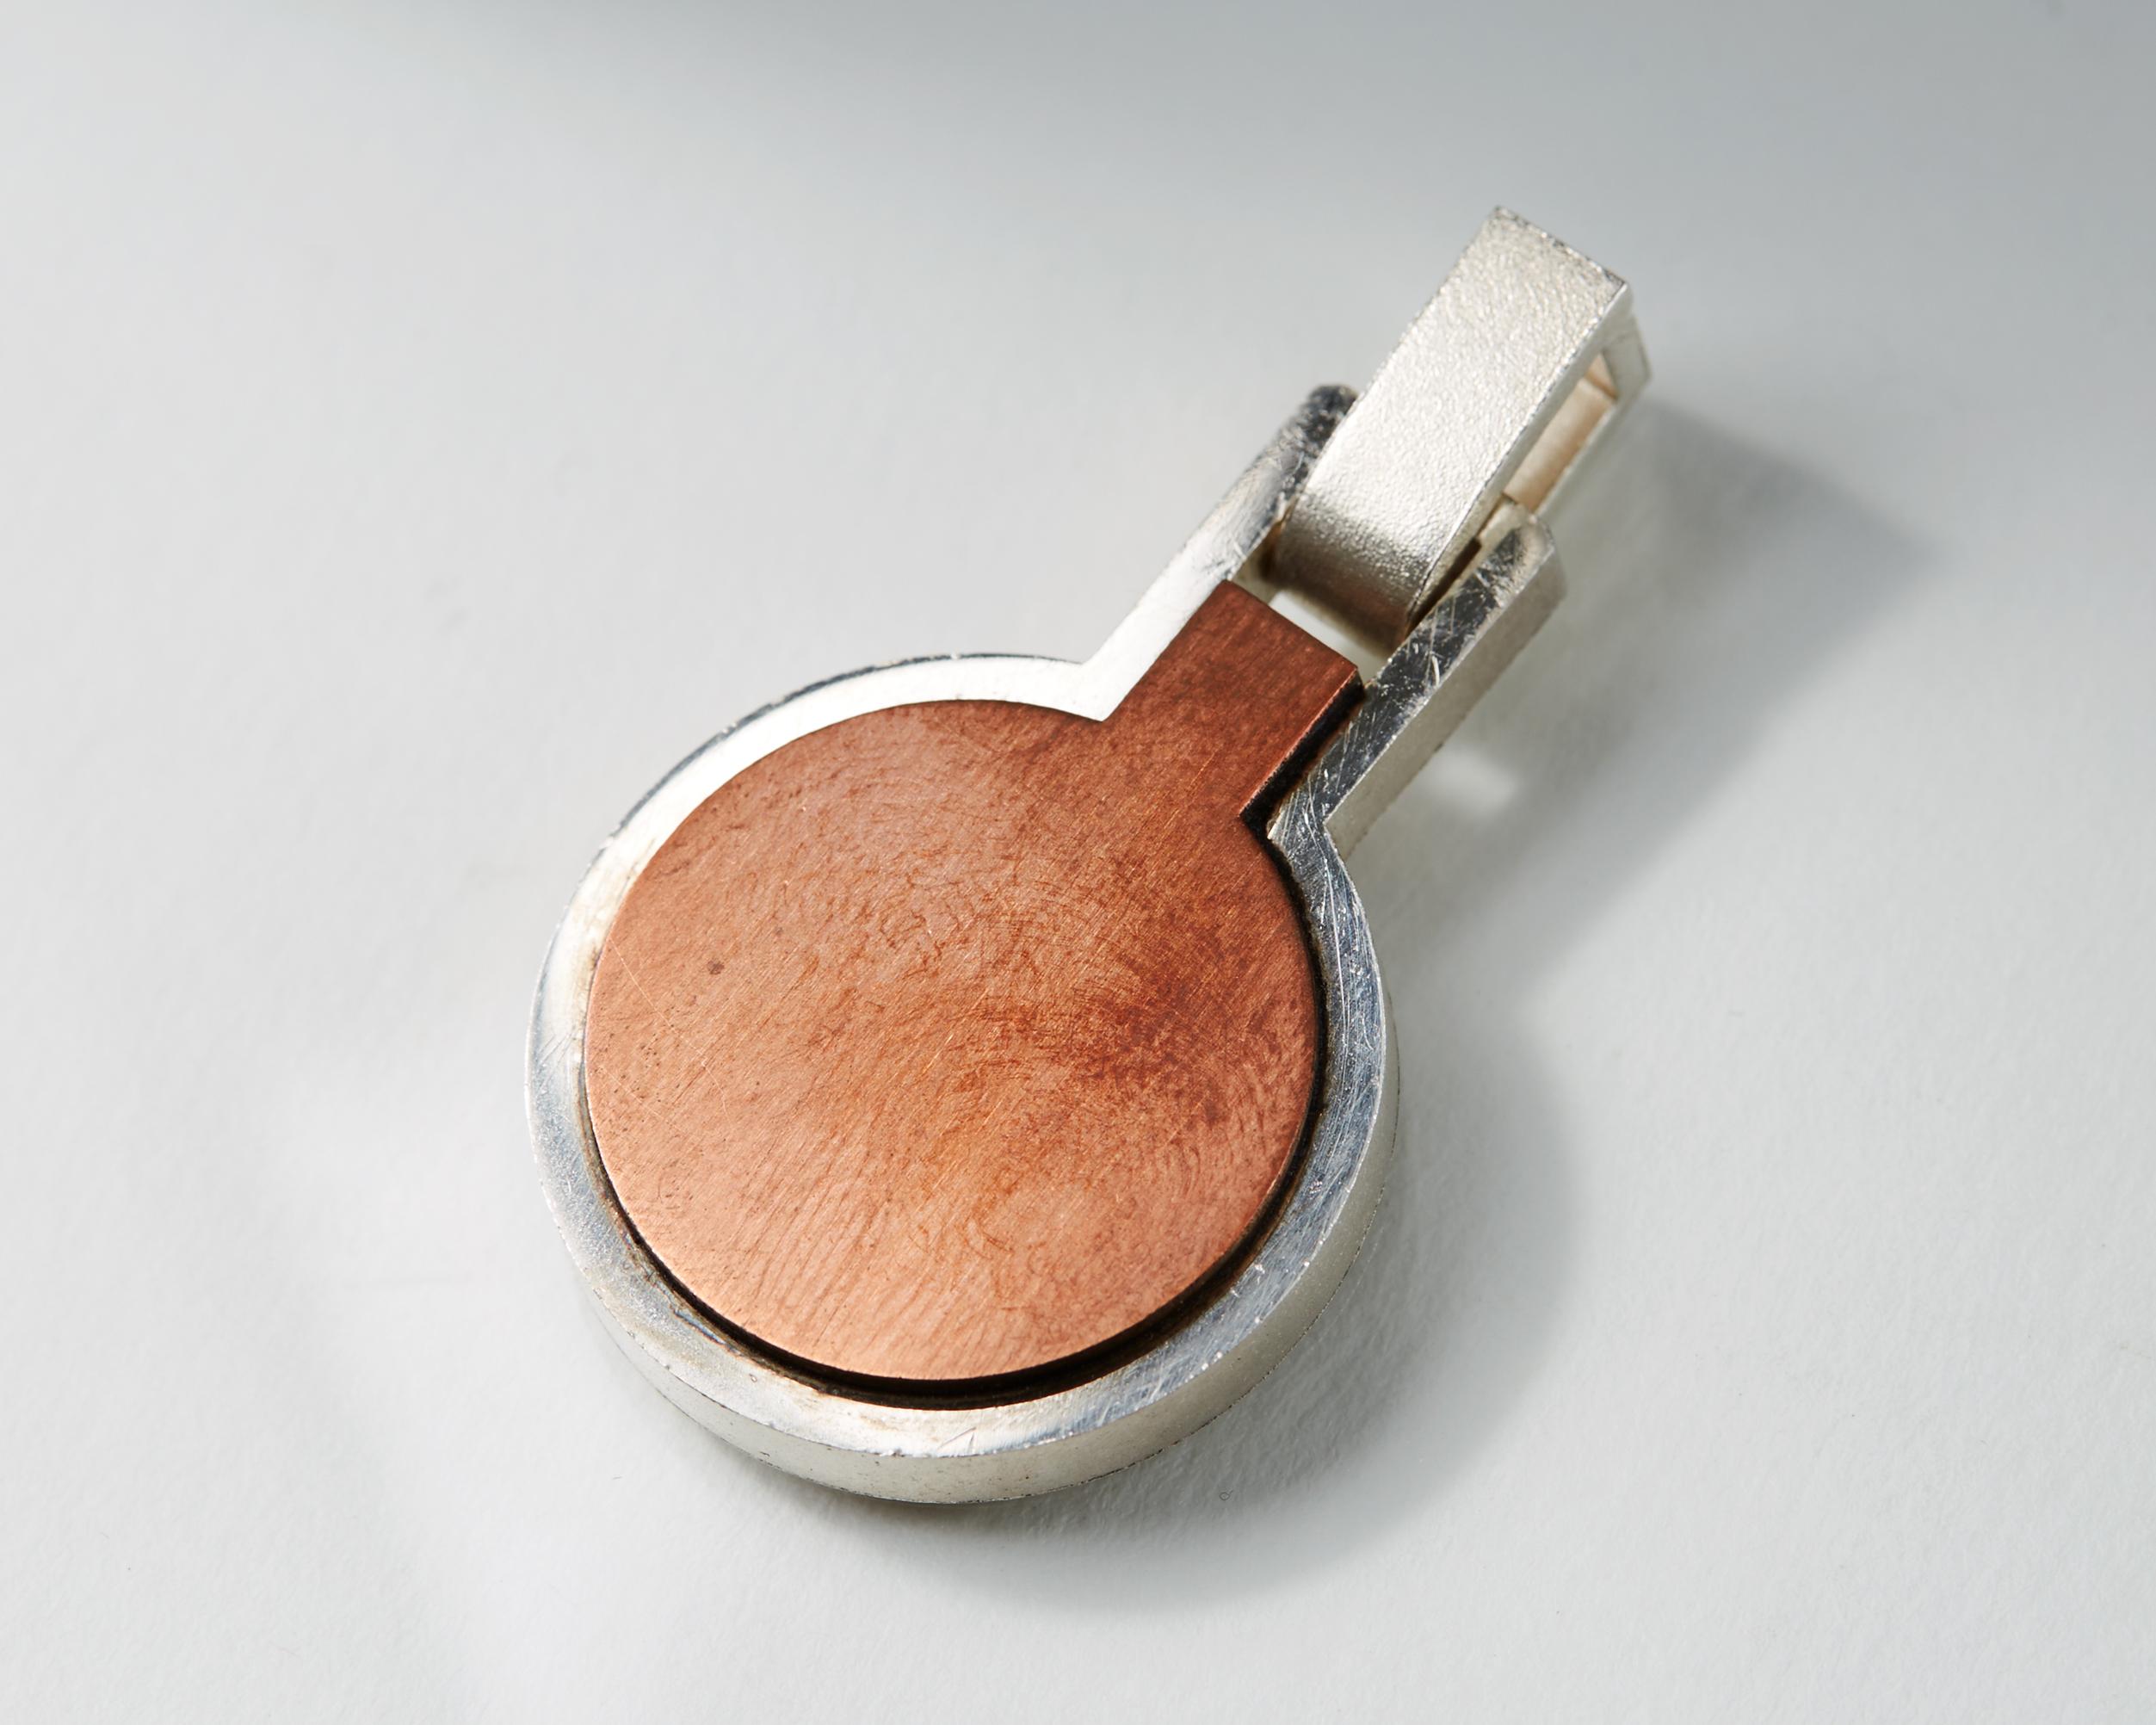 Sterling silver and brushed copper.

D: 4,5 cm/ 1 7/8''